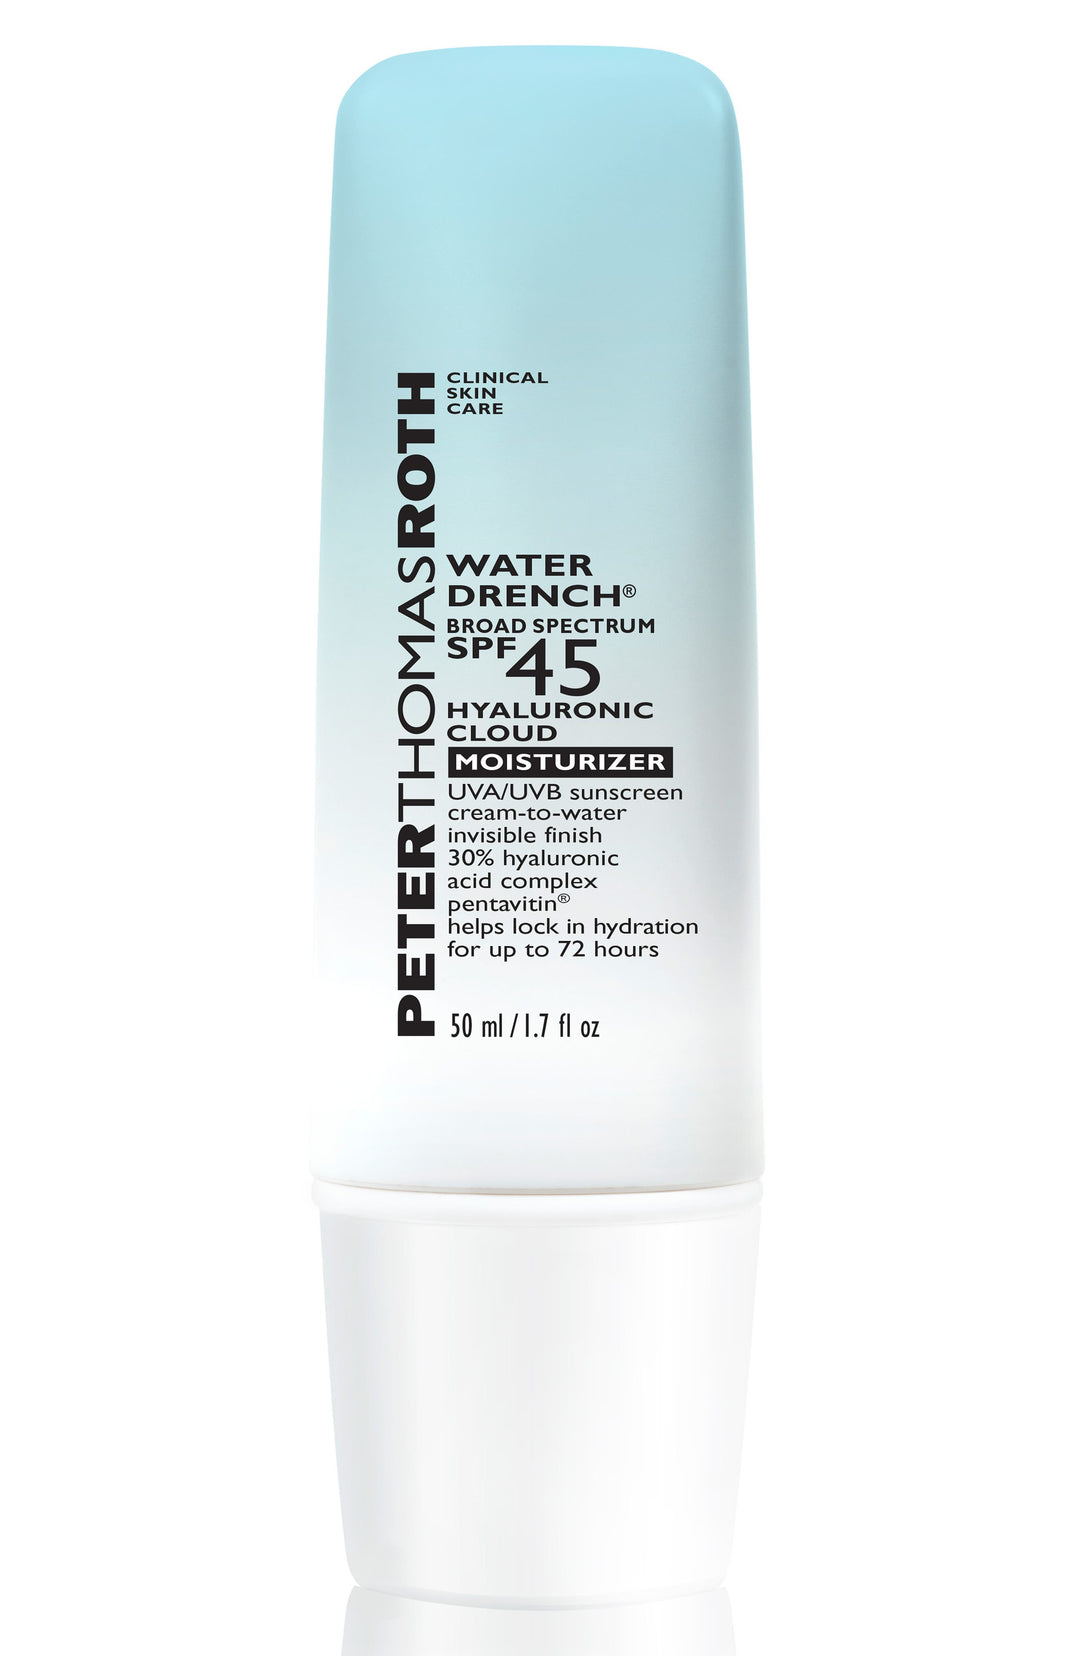 Peter Thomas Roth Water Drench® Hyaluronic Cloud Moisturizer SPF 45 1.7 oz